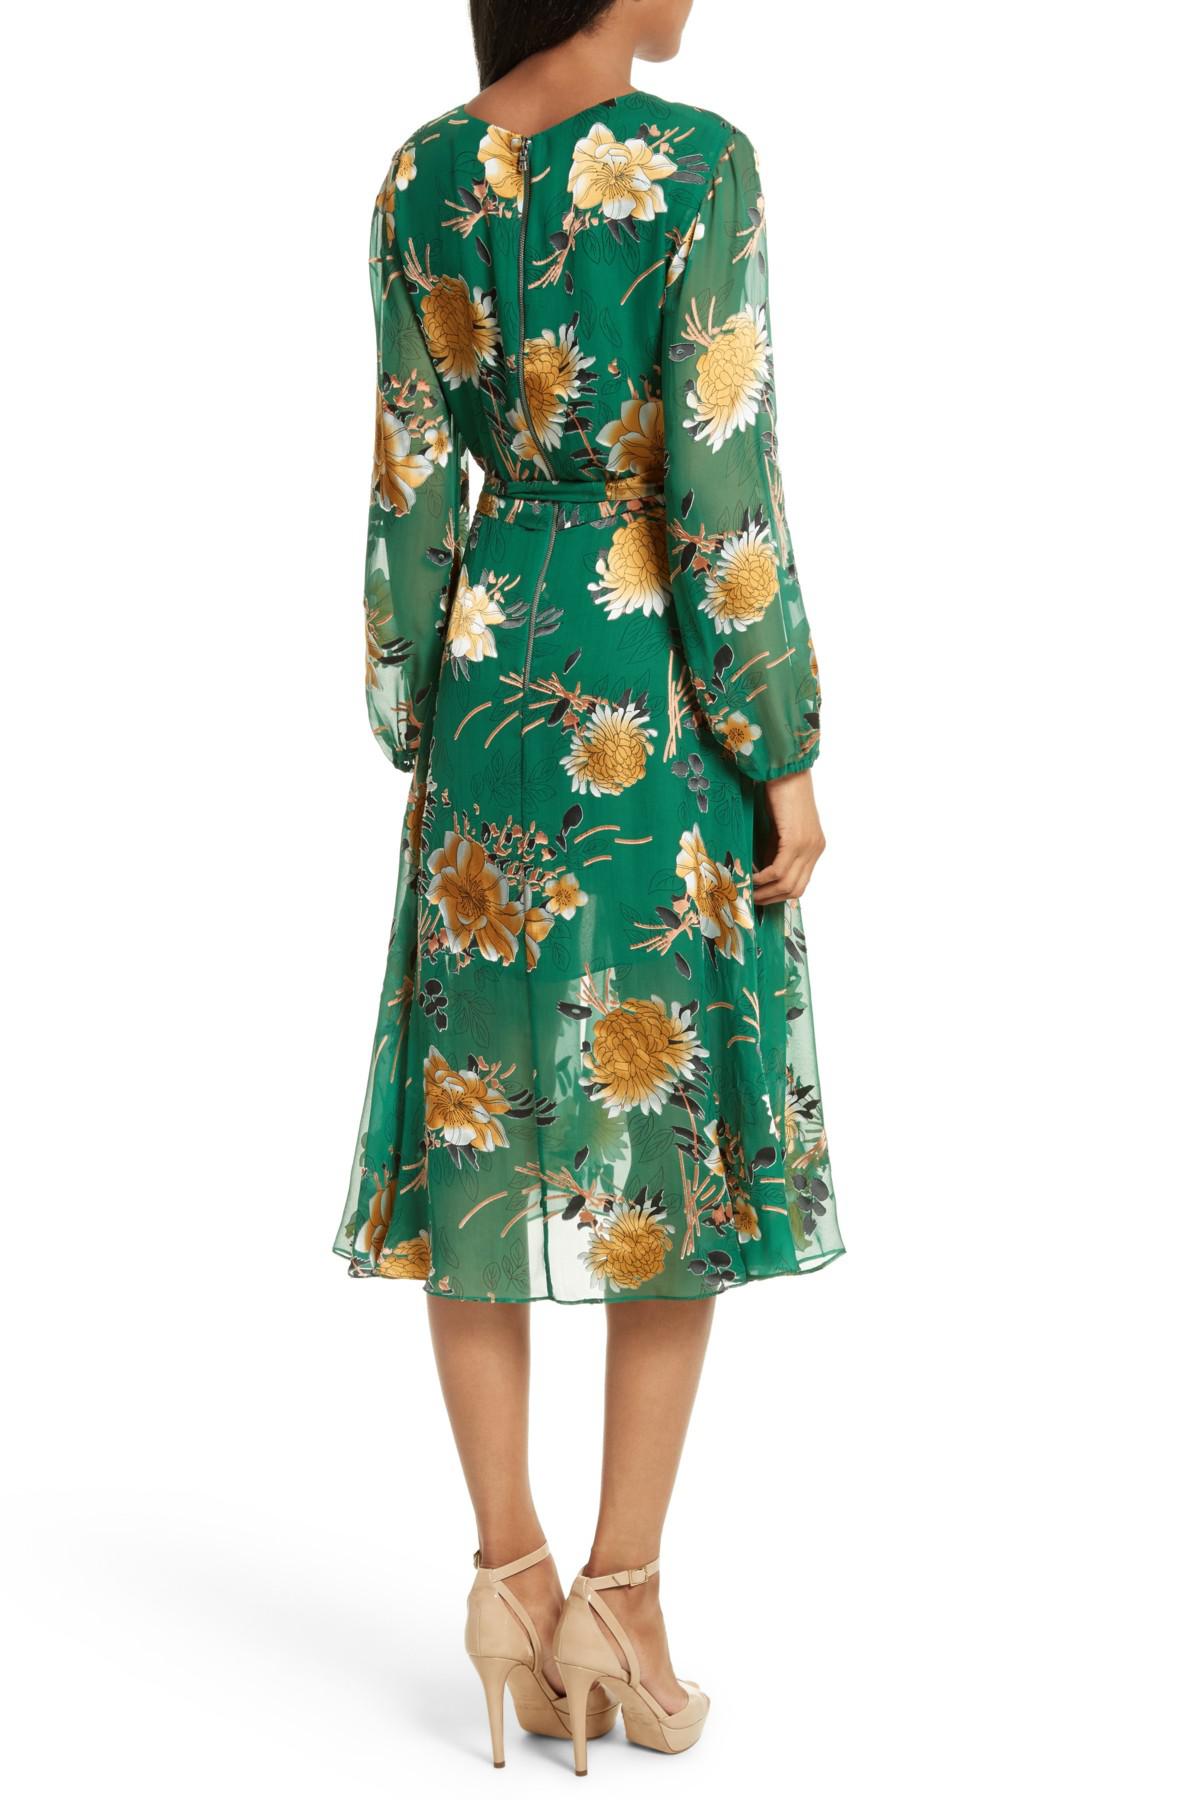 Alice + Olivia Coco Floral Print A-line Dress in Green | Lyst